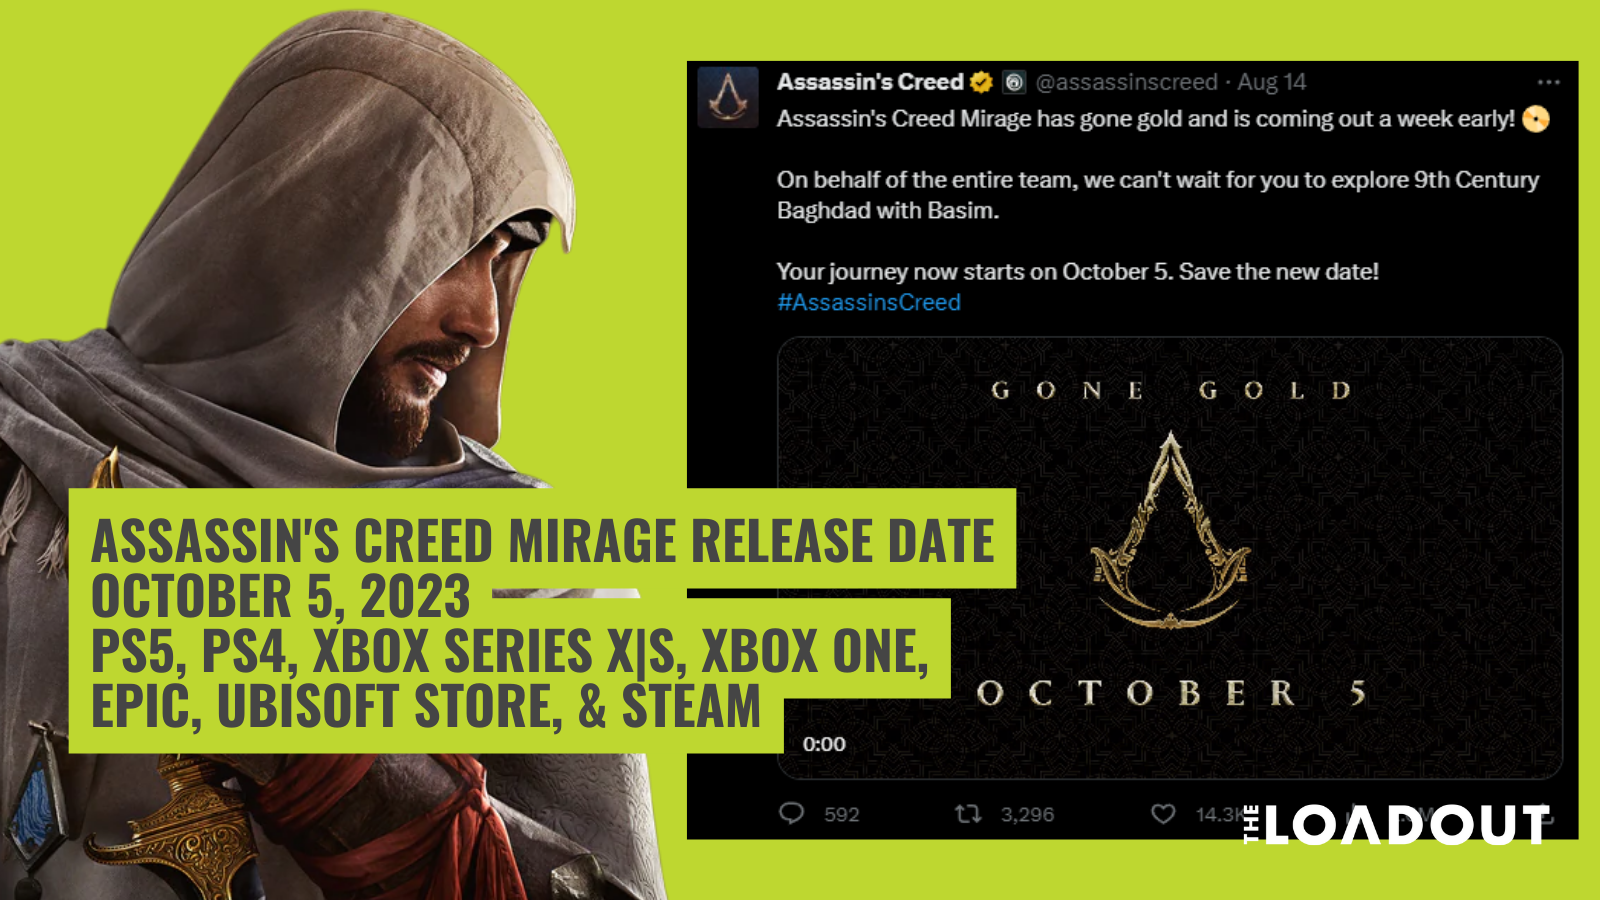 Assassin's Creed Mirage release date, gameplay footage, and more